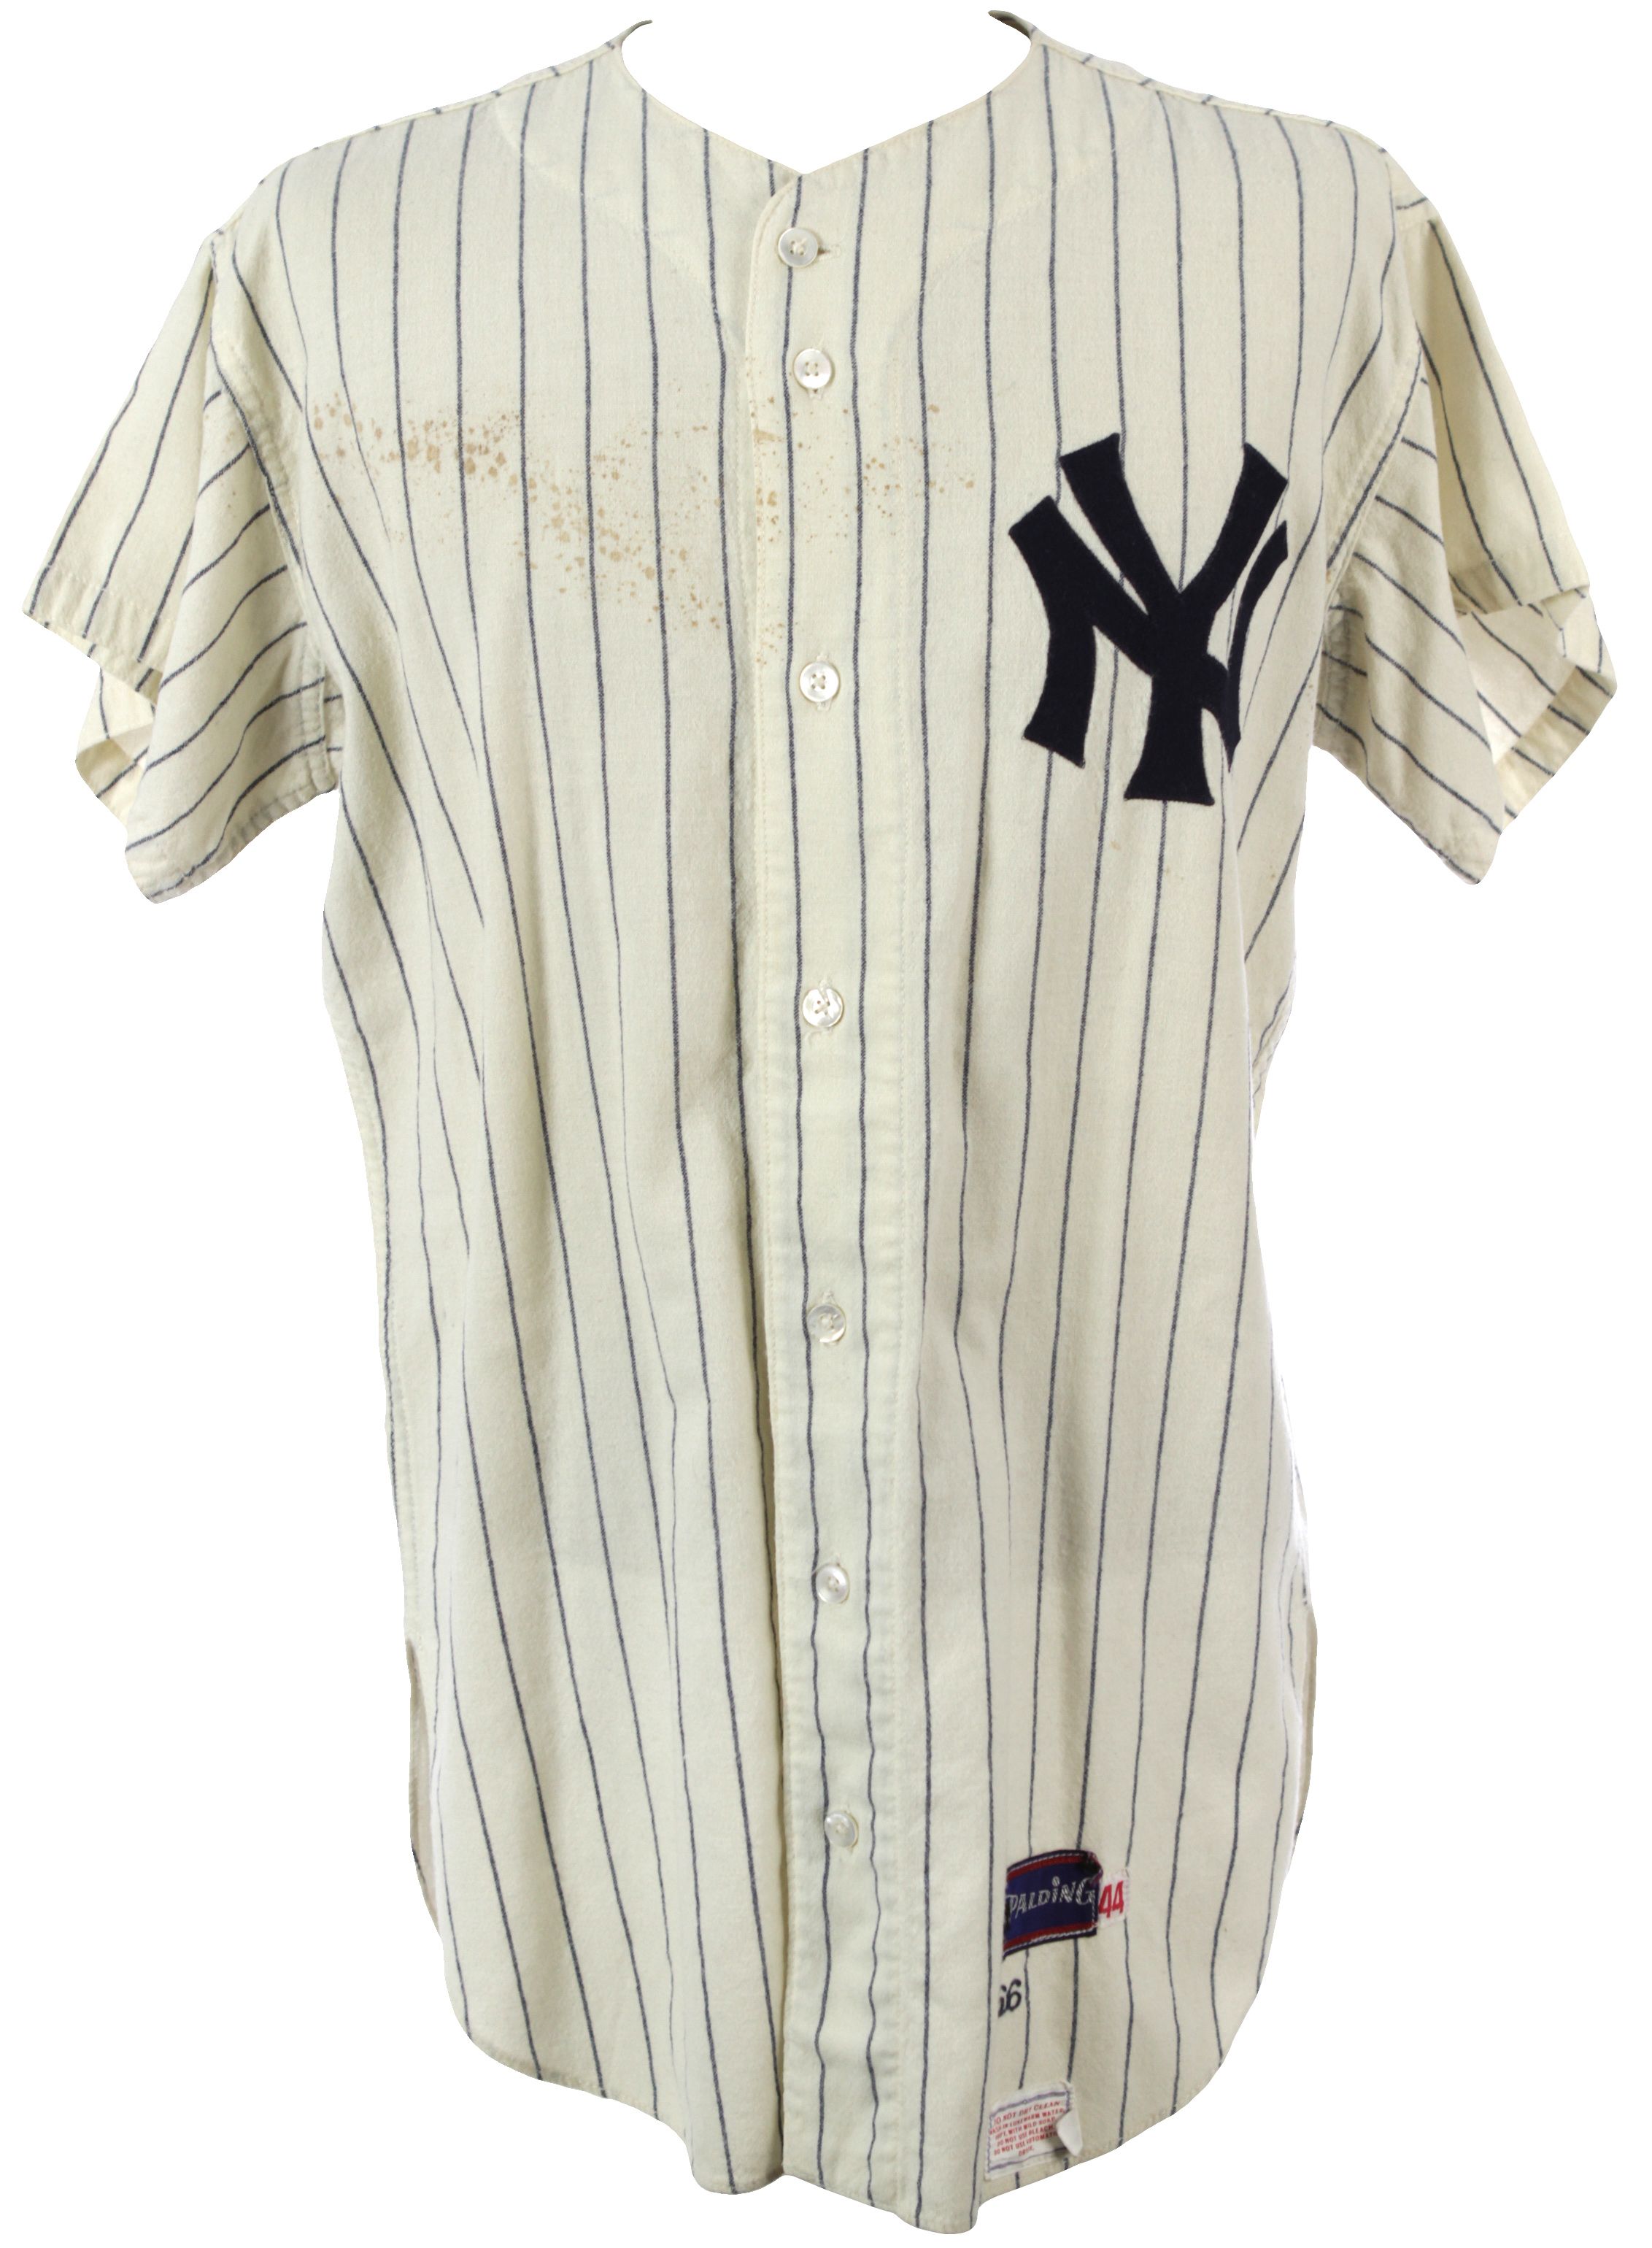 mickey mantle game worn jersey